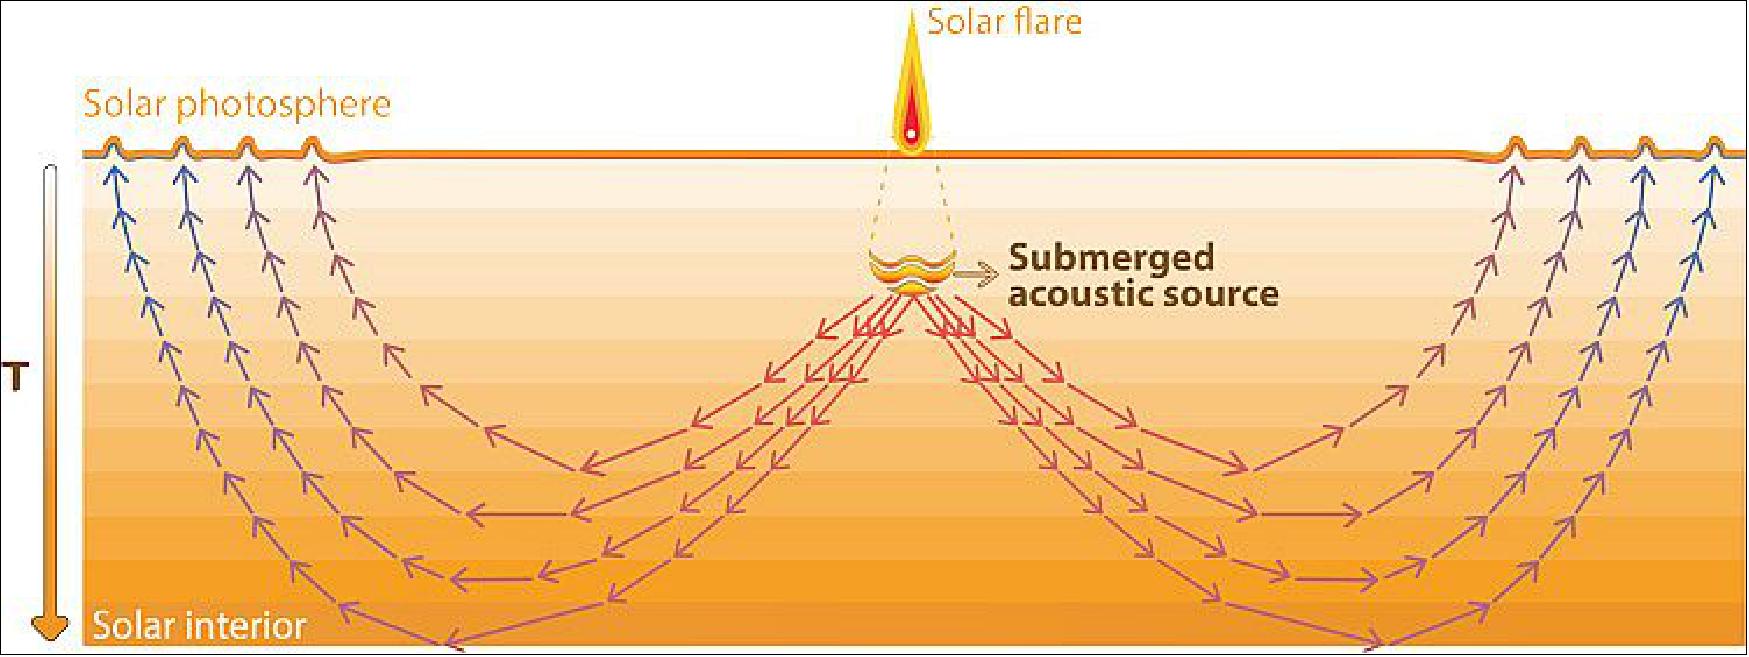 Figure 31: Solar flares trigger acoustic waves (sunquakes) that travel downward but, because of increasing temperatures, are bent or refracted back to the surface, where they produce ripples that can be seen from Earth-orbiting observatories. Solar physicists have discovered a sunquake generated by an impulsive explosion 1,000 kilometers below the flare (top), suggesting that the link between sunquakes and flares is not simple. (image credit: UC Berkeley, cartoon by Juan Camilo Buitrago-Casas)